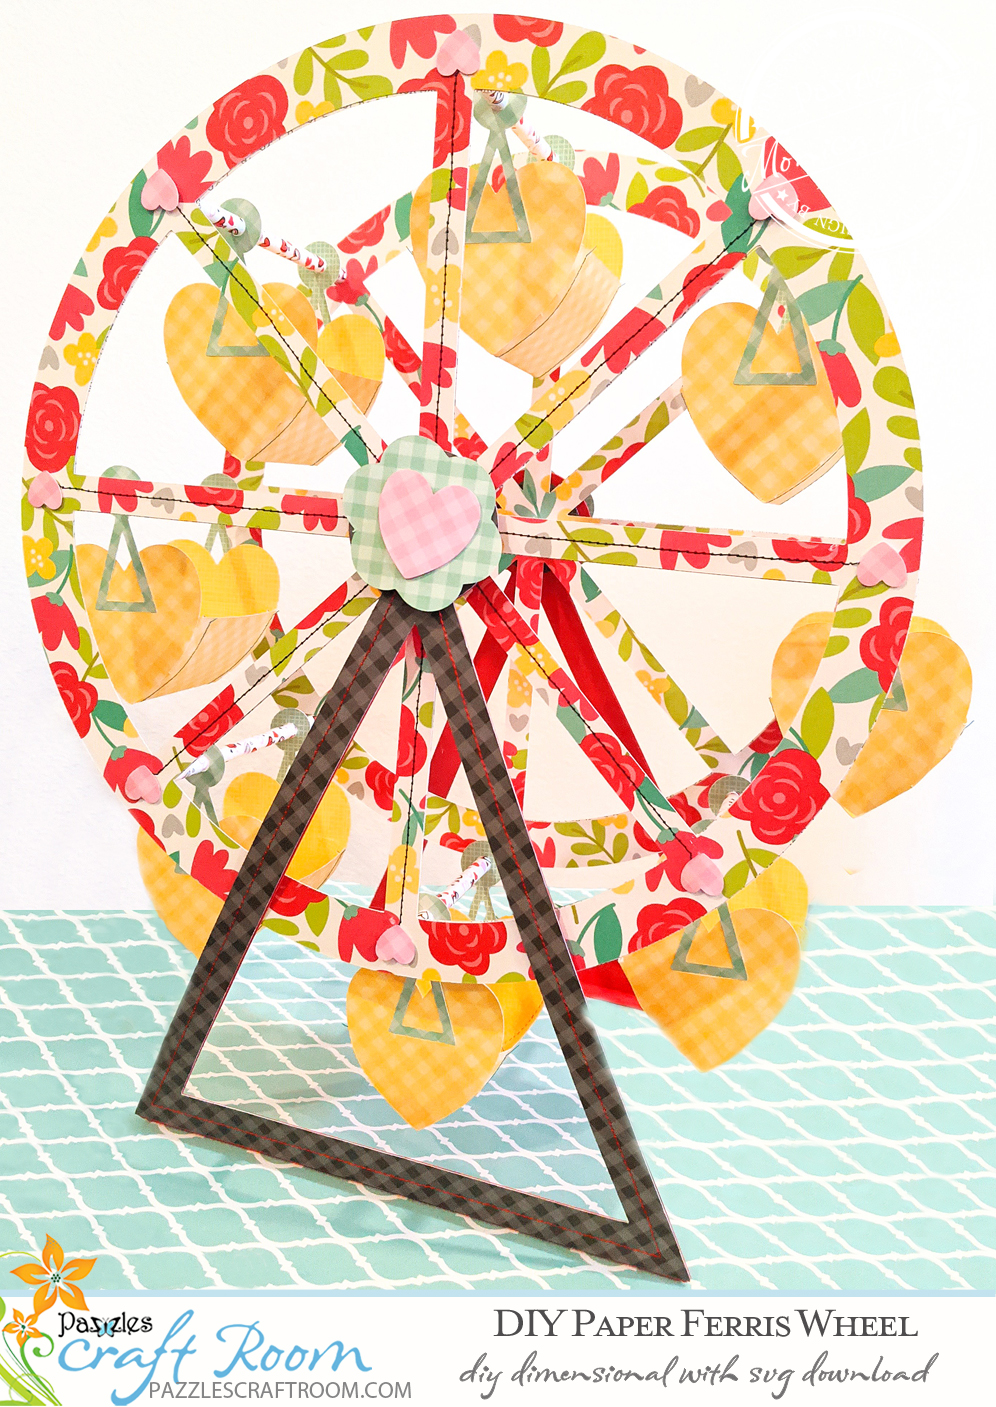 Download 3d Diy Interactive Ferris Wheel With Instant Svg Download Pazzles Yellowimages Mockups